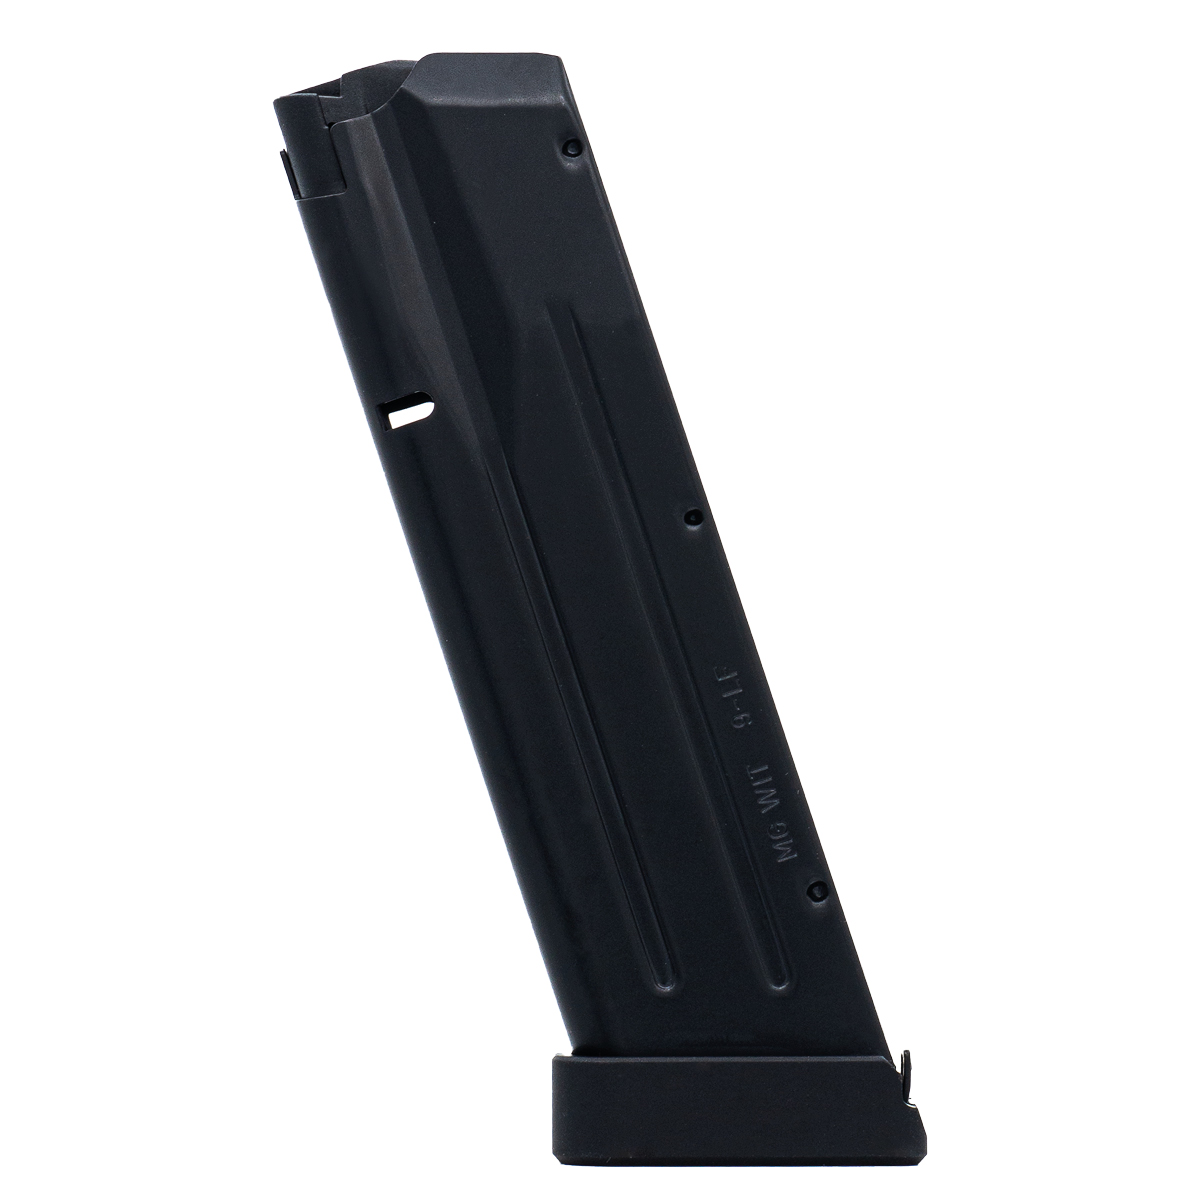 Witness - Tanfoglio Large Frame 9mm 19 RD Competition Match Grade Magazine with Aluminum +2 Adapter Mec-Gar MGWITLF919M